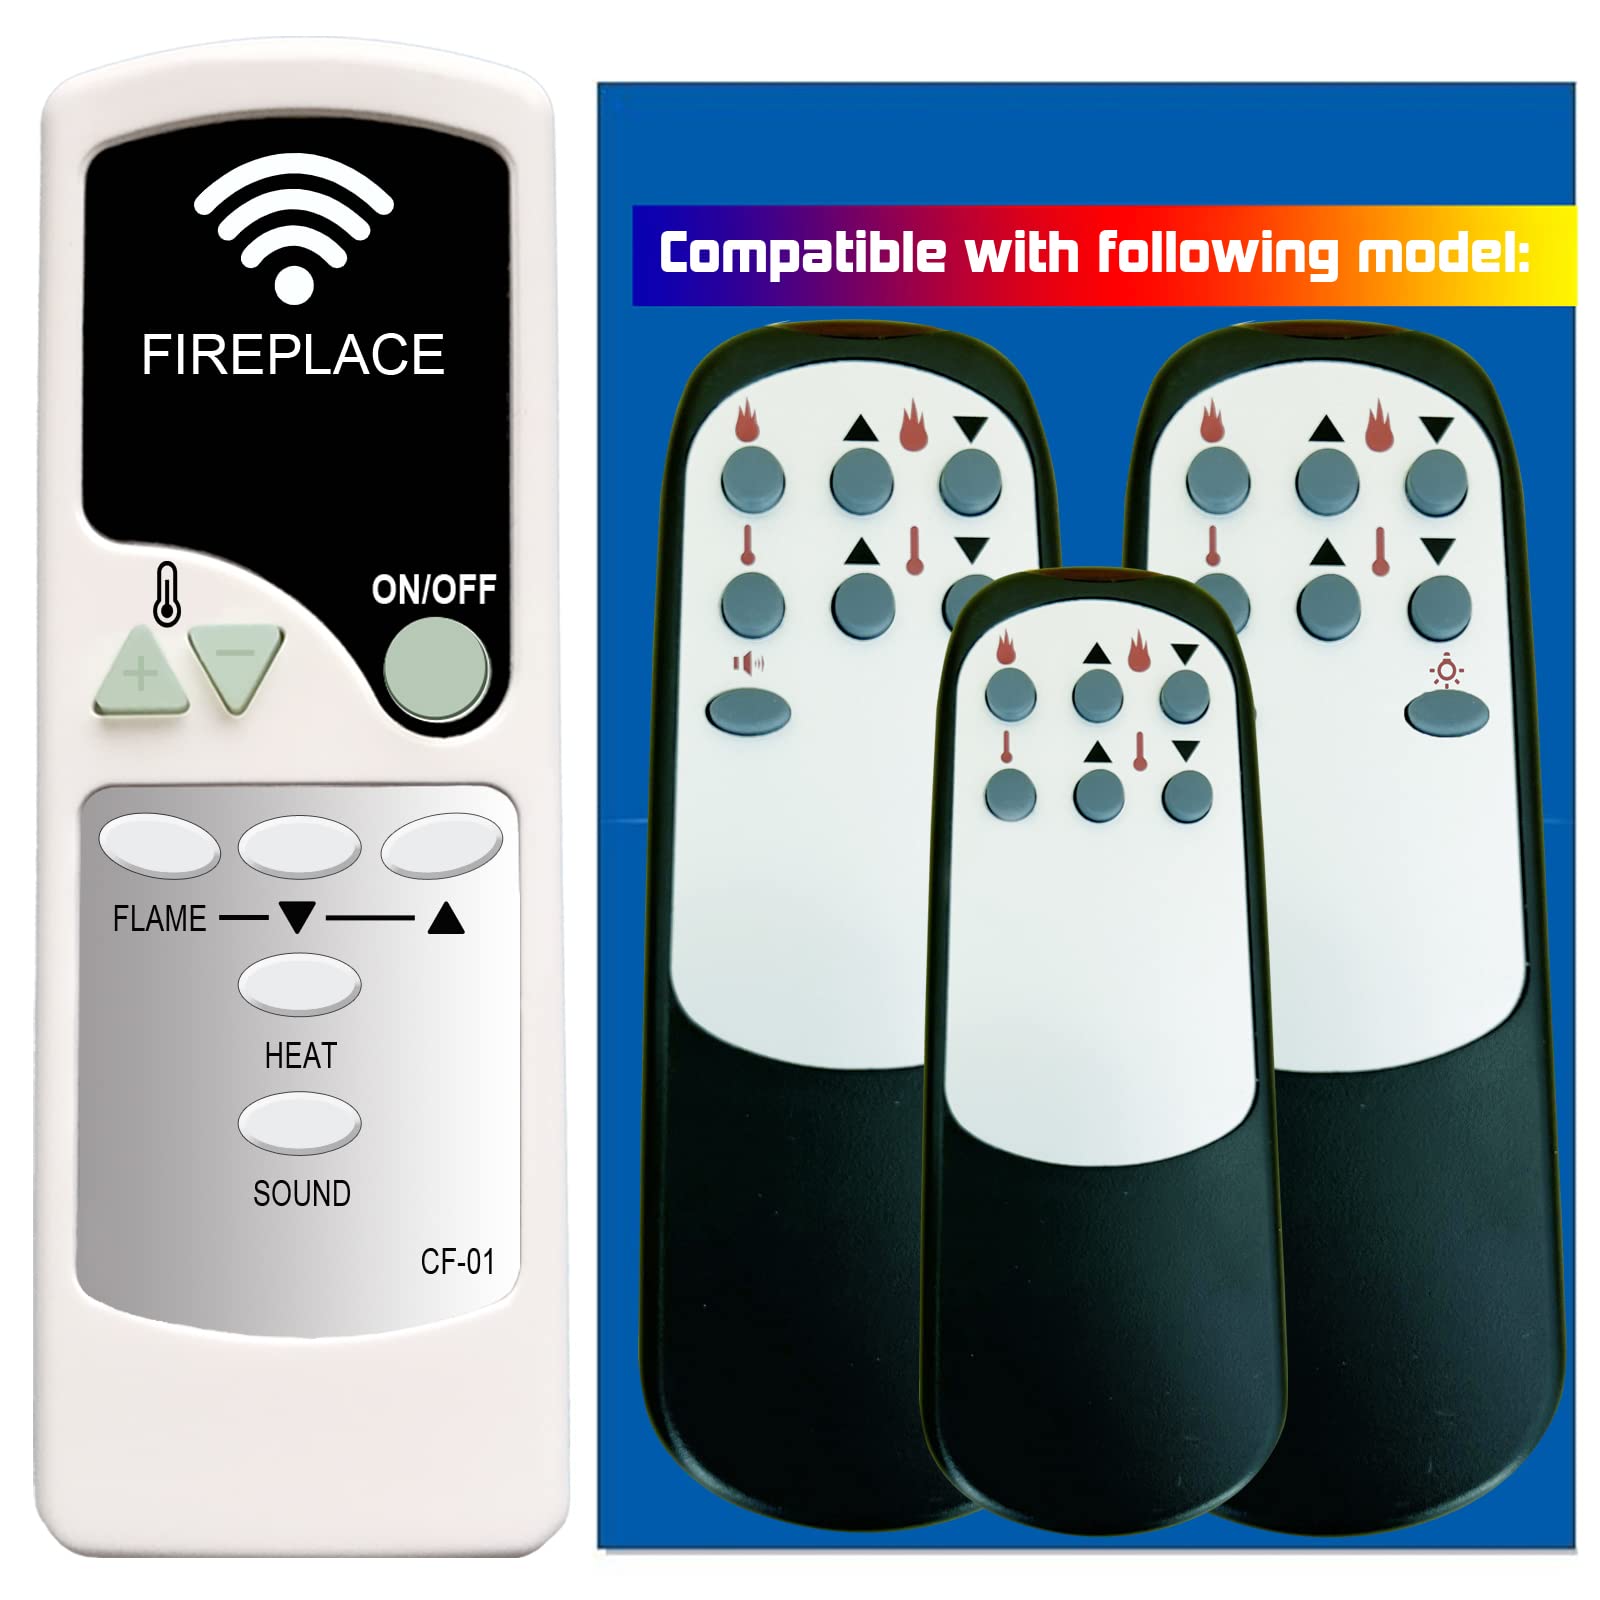 Replacement for Vermont Casting CFM PYROMASTER TEMCO Electric Fireplace Heater Remote Control HEF22 HEF26 HEF33 HEF36 10006950 TEF26 TEF33 TEF36 TE2261 TE2361